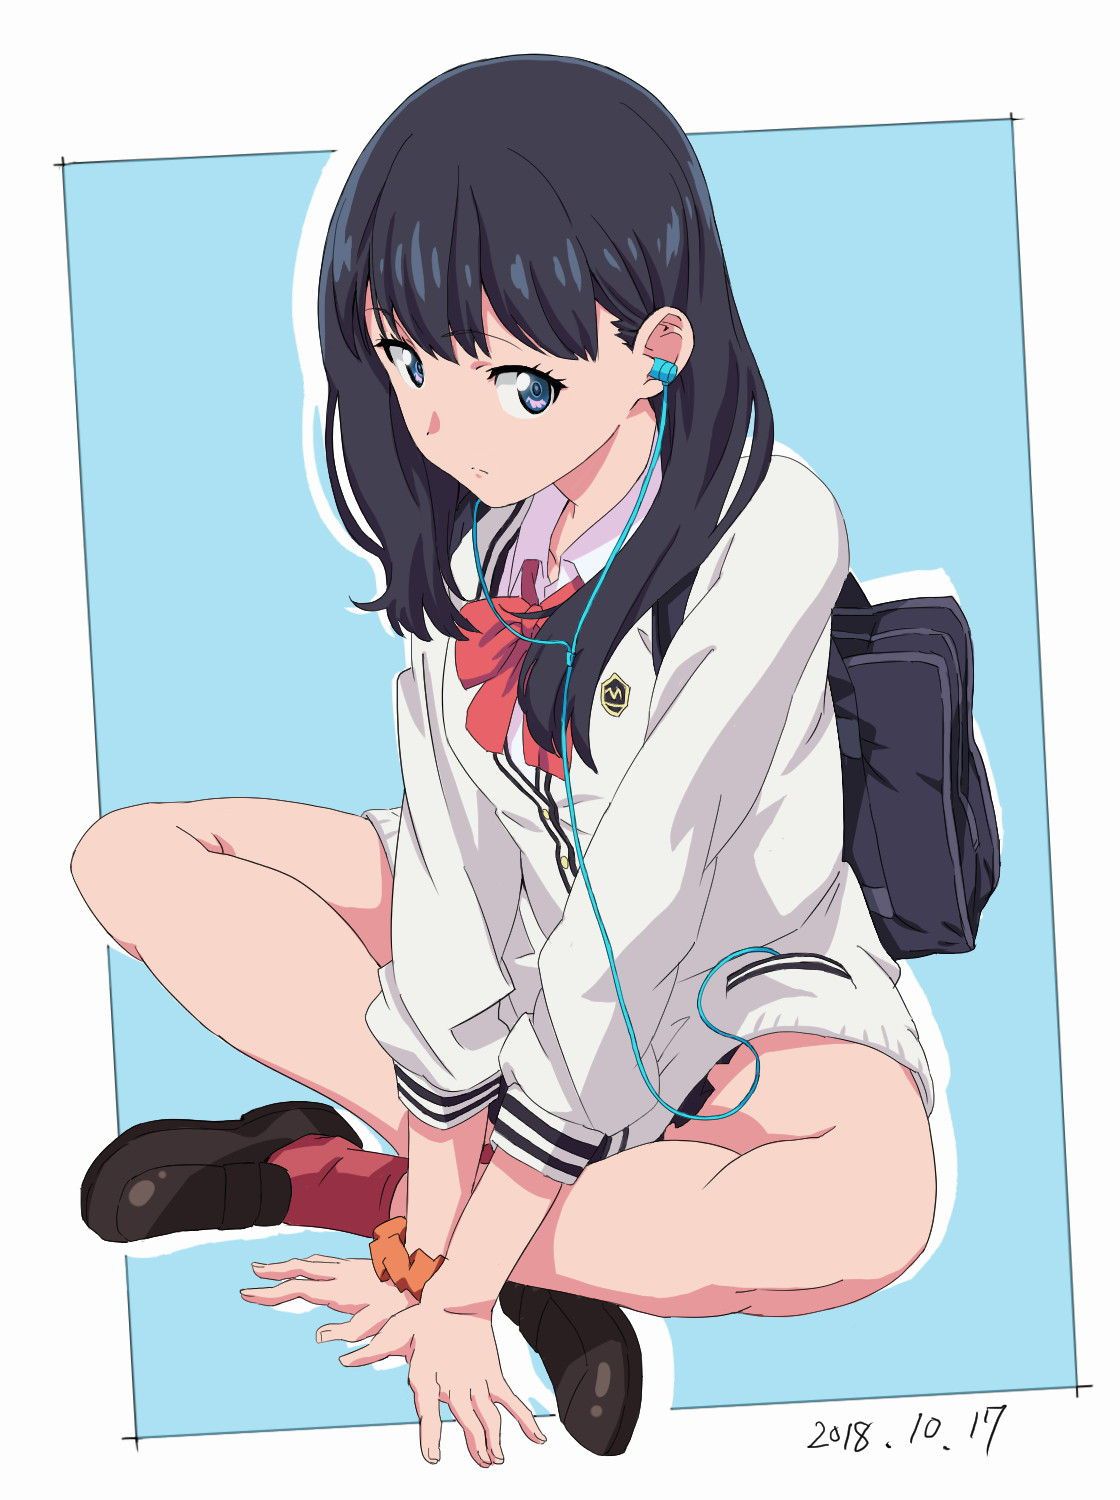 SSSS. Please take a secondary image with GRIDMAN! 10